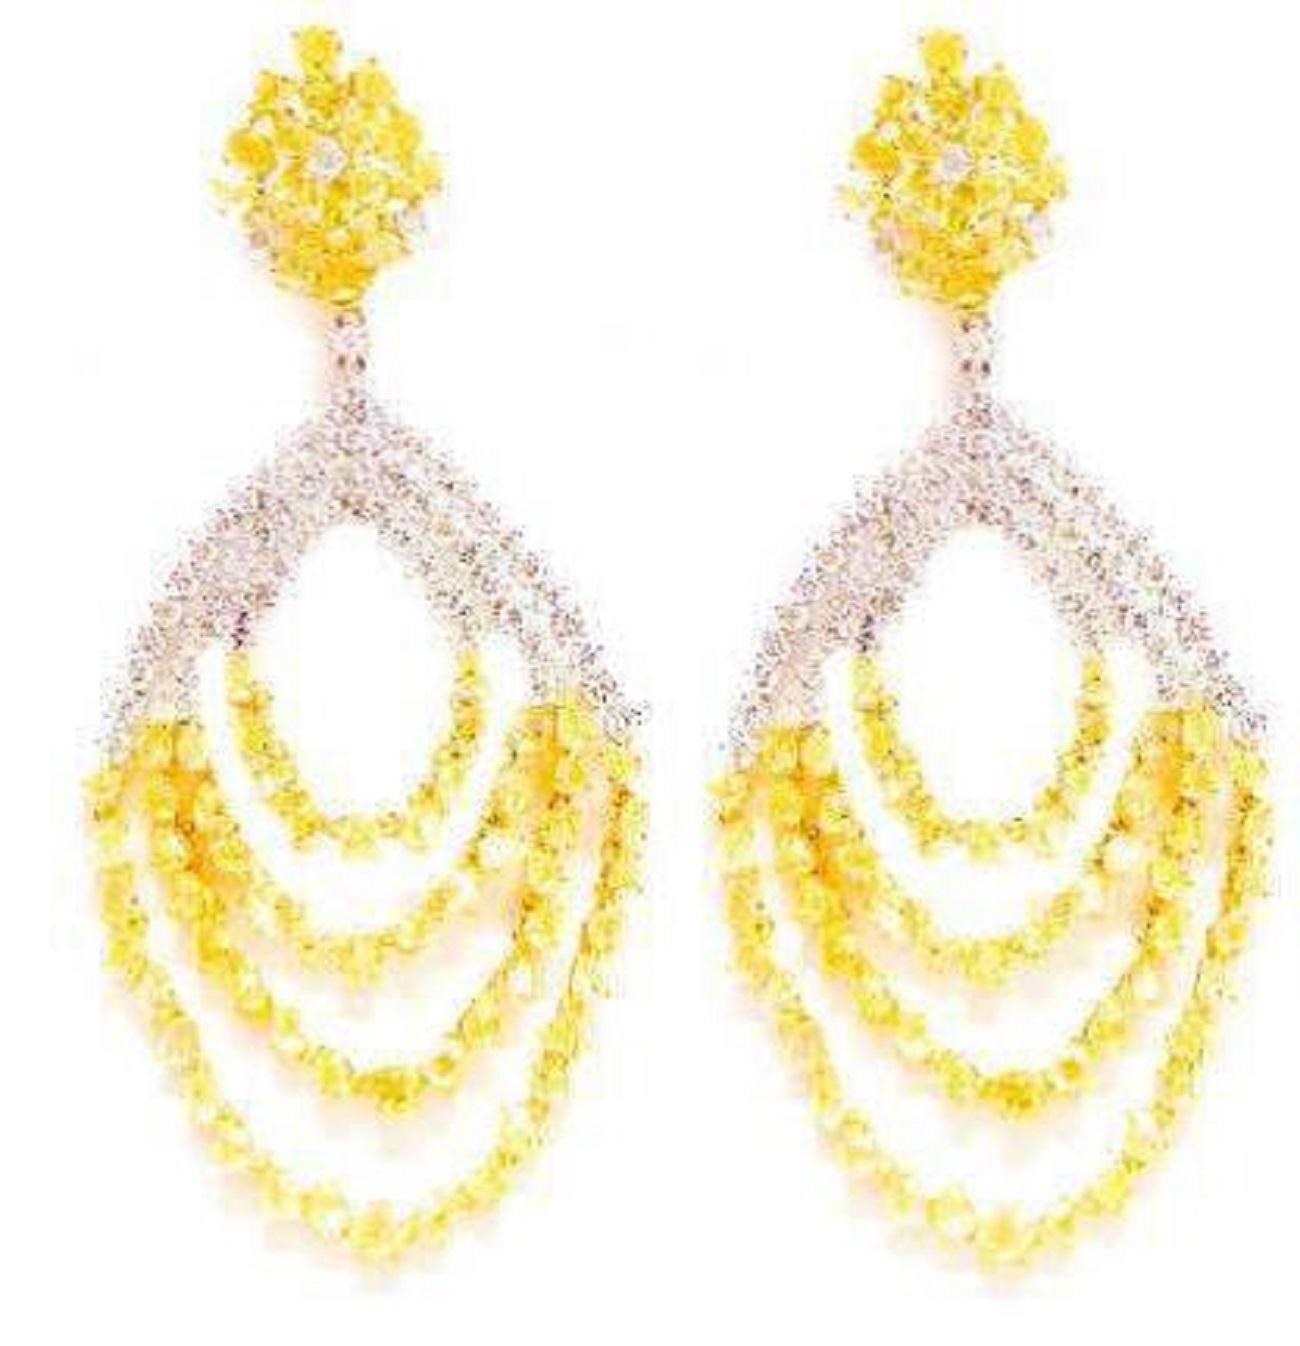 18 kt white and yellow gold chandelier diamond earrings adorned with 16.73 cts tw of diamonds.
Diana M. is a leading supplier of top-quality fine jewelry for over 35 years.
Diana M is one-stop shop for all your jewelry shopping, carrying line of